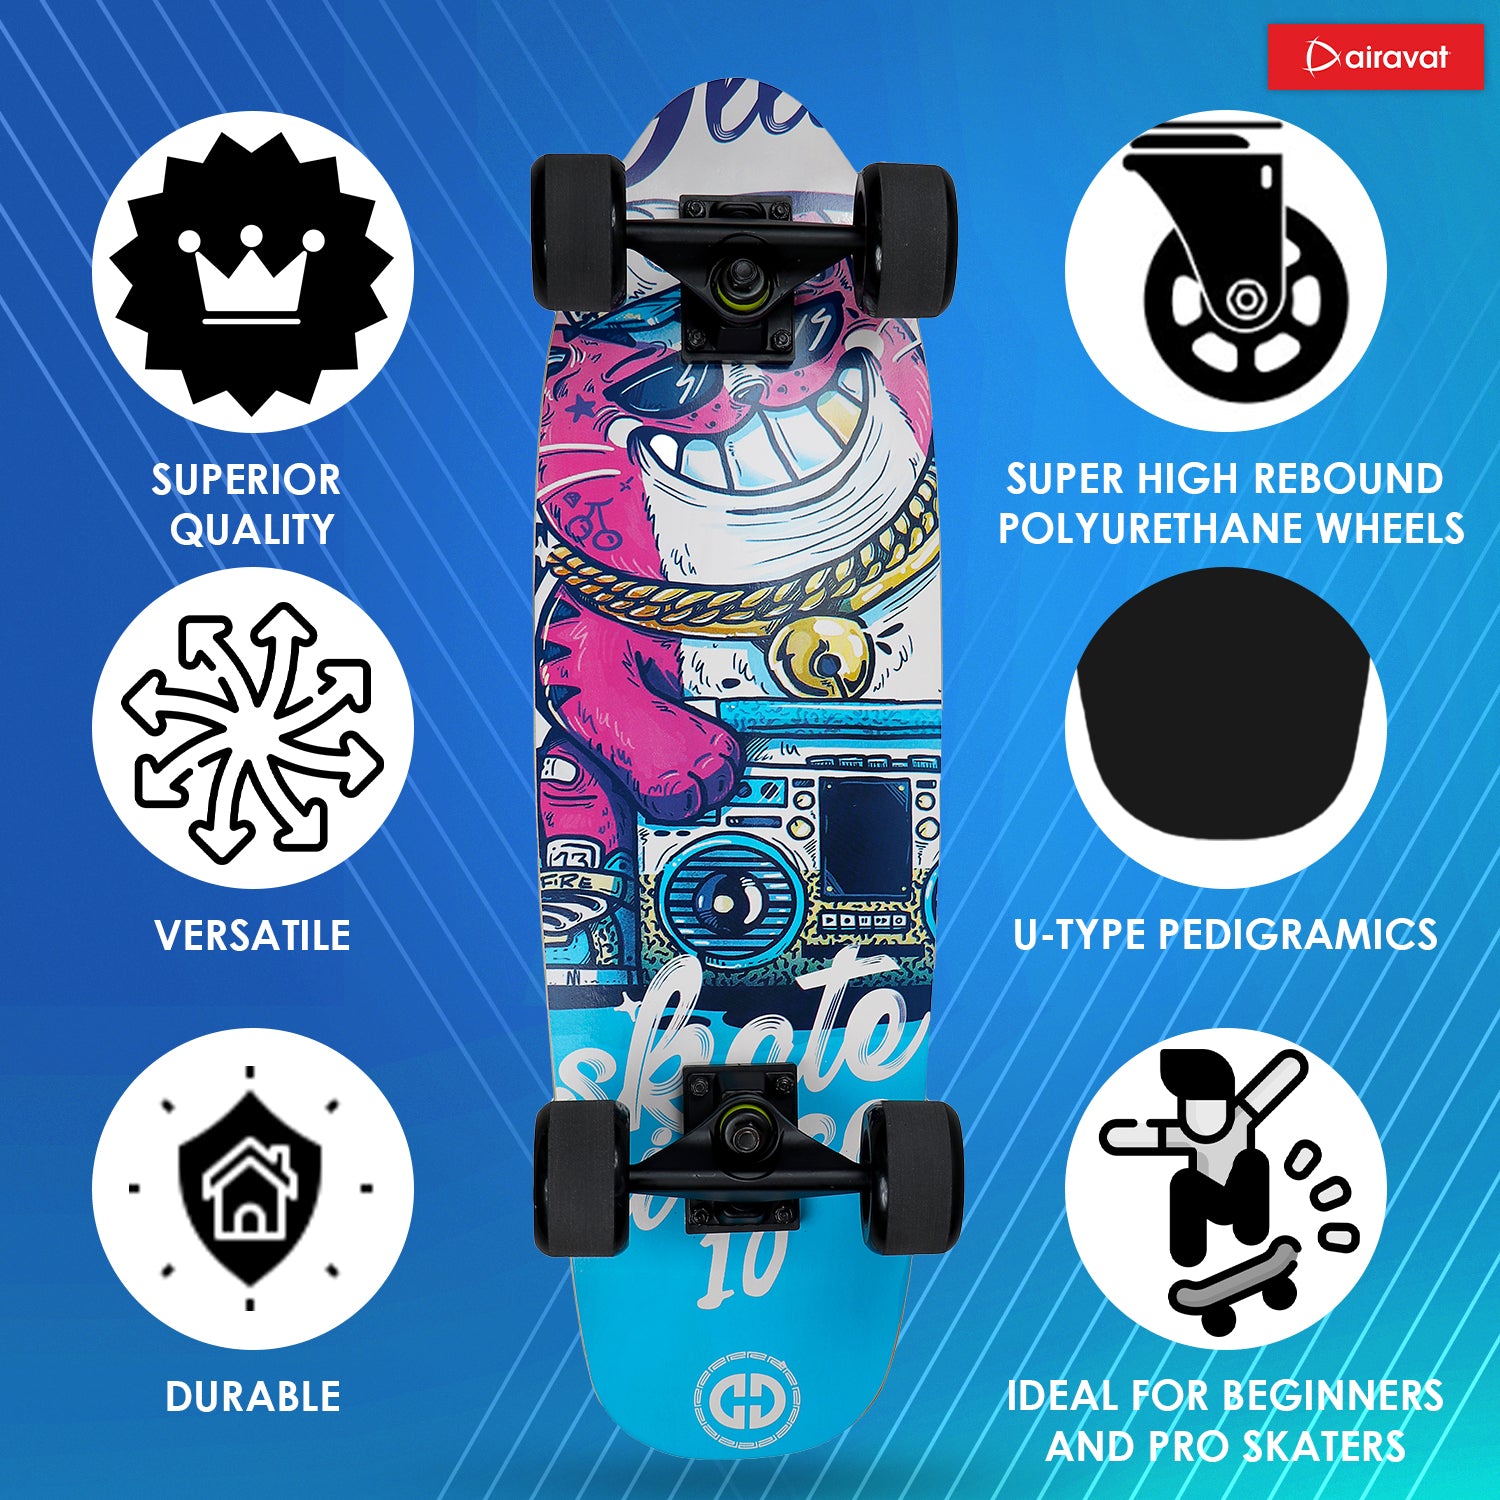 7815-skateboard-style2-more-features